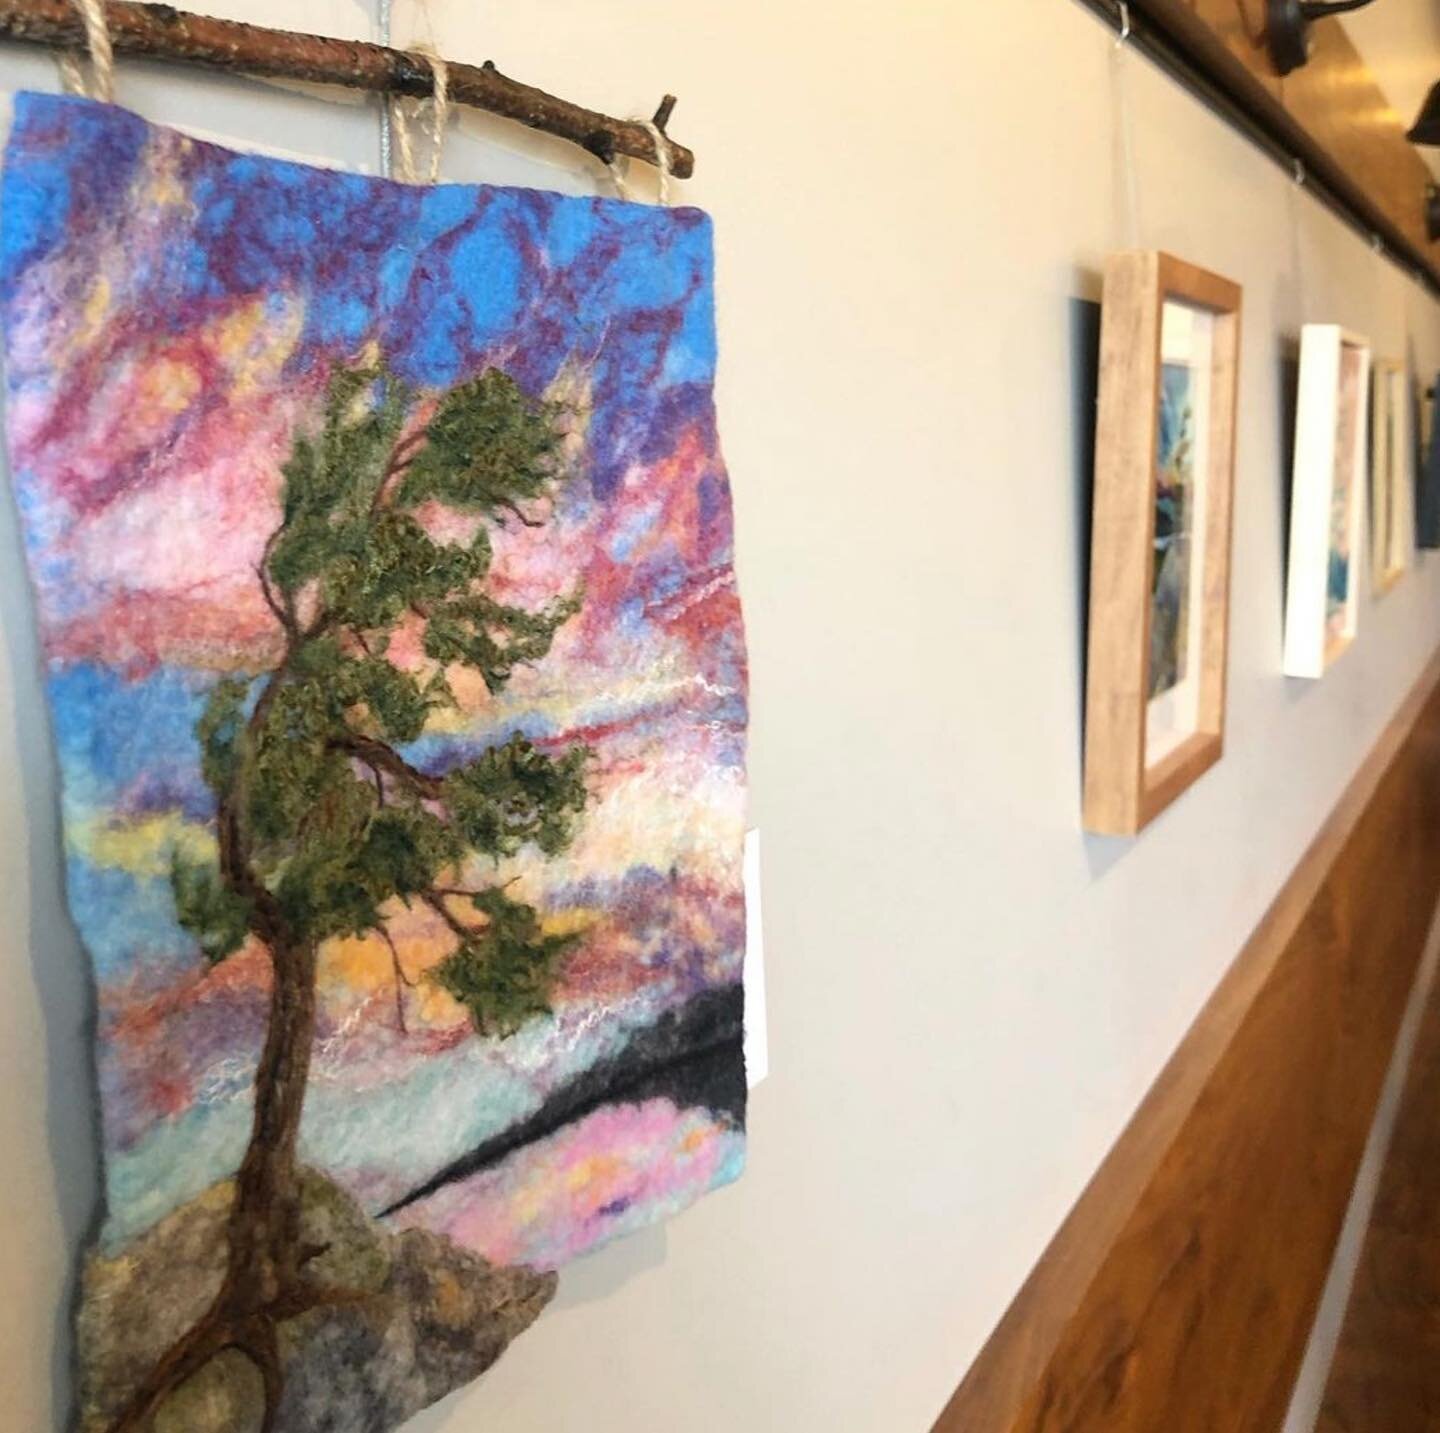 Take a peek at some of our incredible past Pinchmans exhibitions! We&rsquo;re so proud to be able to showcase so much Northern talent ❤️ 

Are you an artist interested in showing your work at Pinchmans Cafe &amp; Artisan Bakery in Sudbury? Head to th